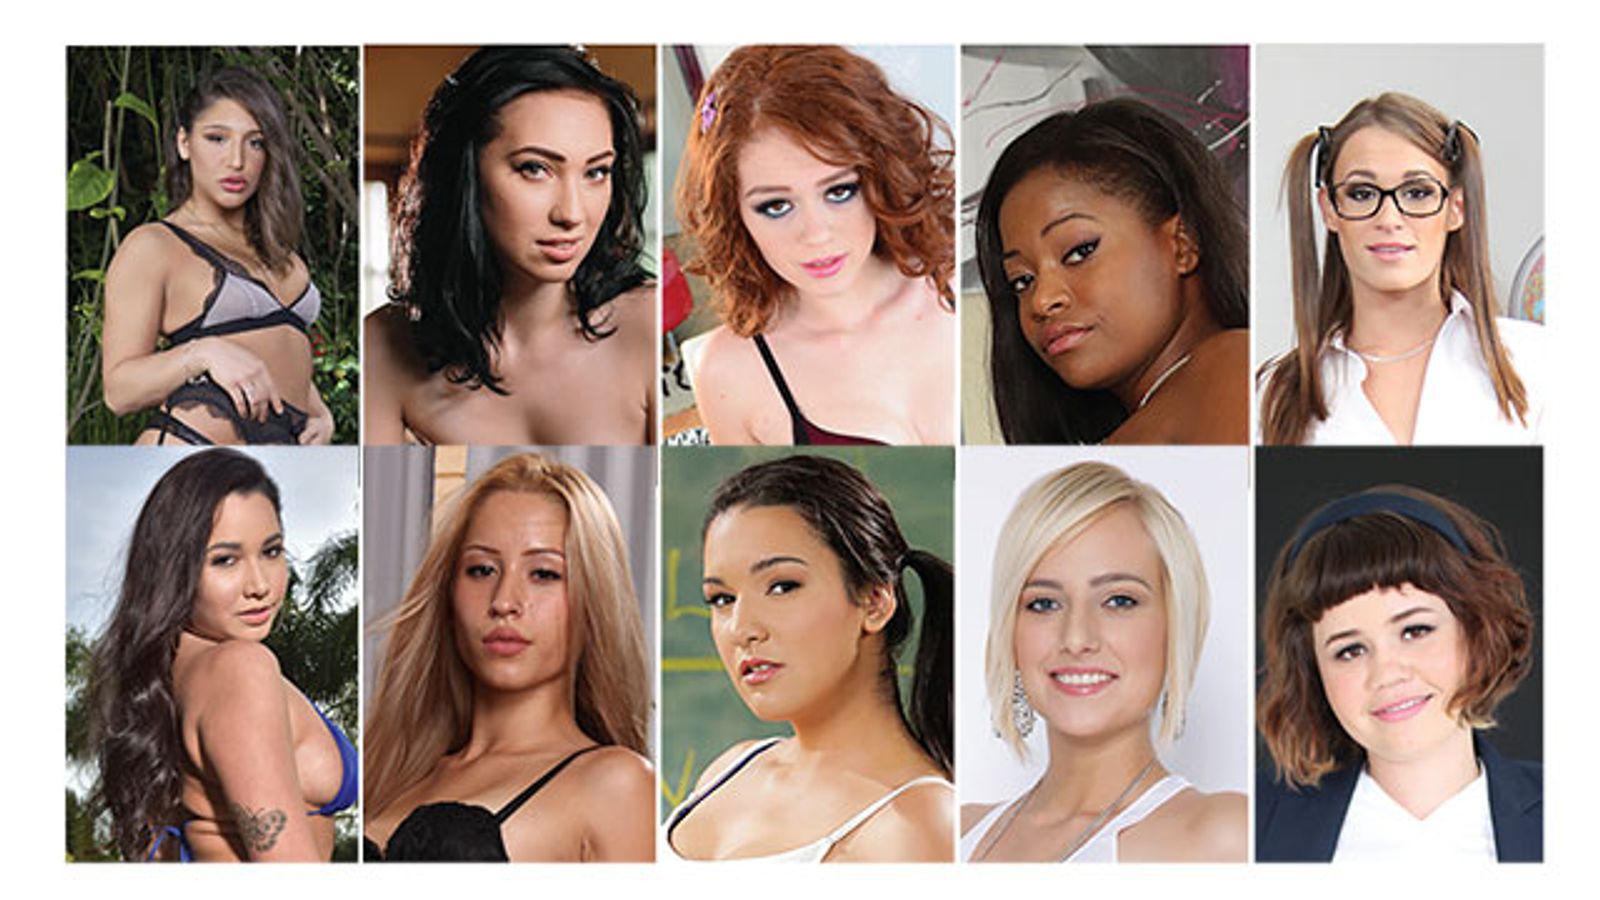 Newbies Have Their Say on 'Hot Girls Wanted'